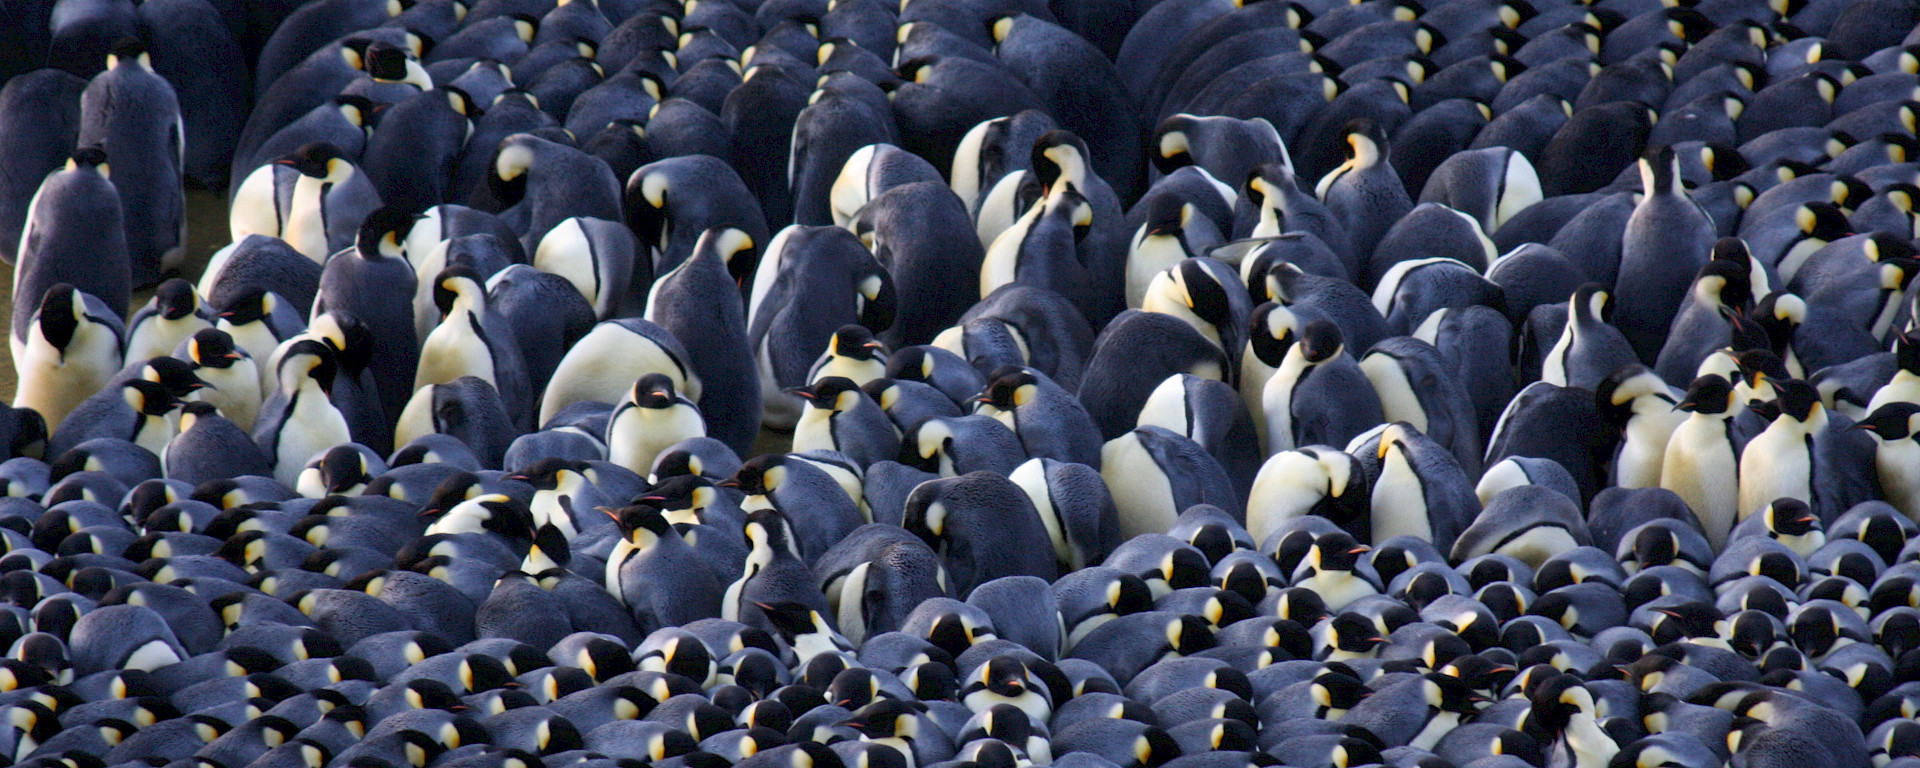 A mass of emperor penguins snuggle together to keep warm.